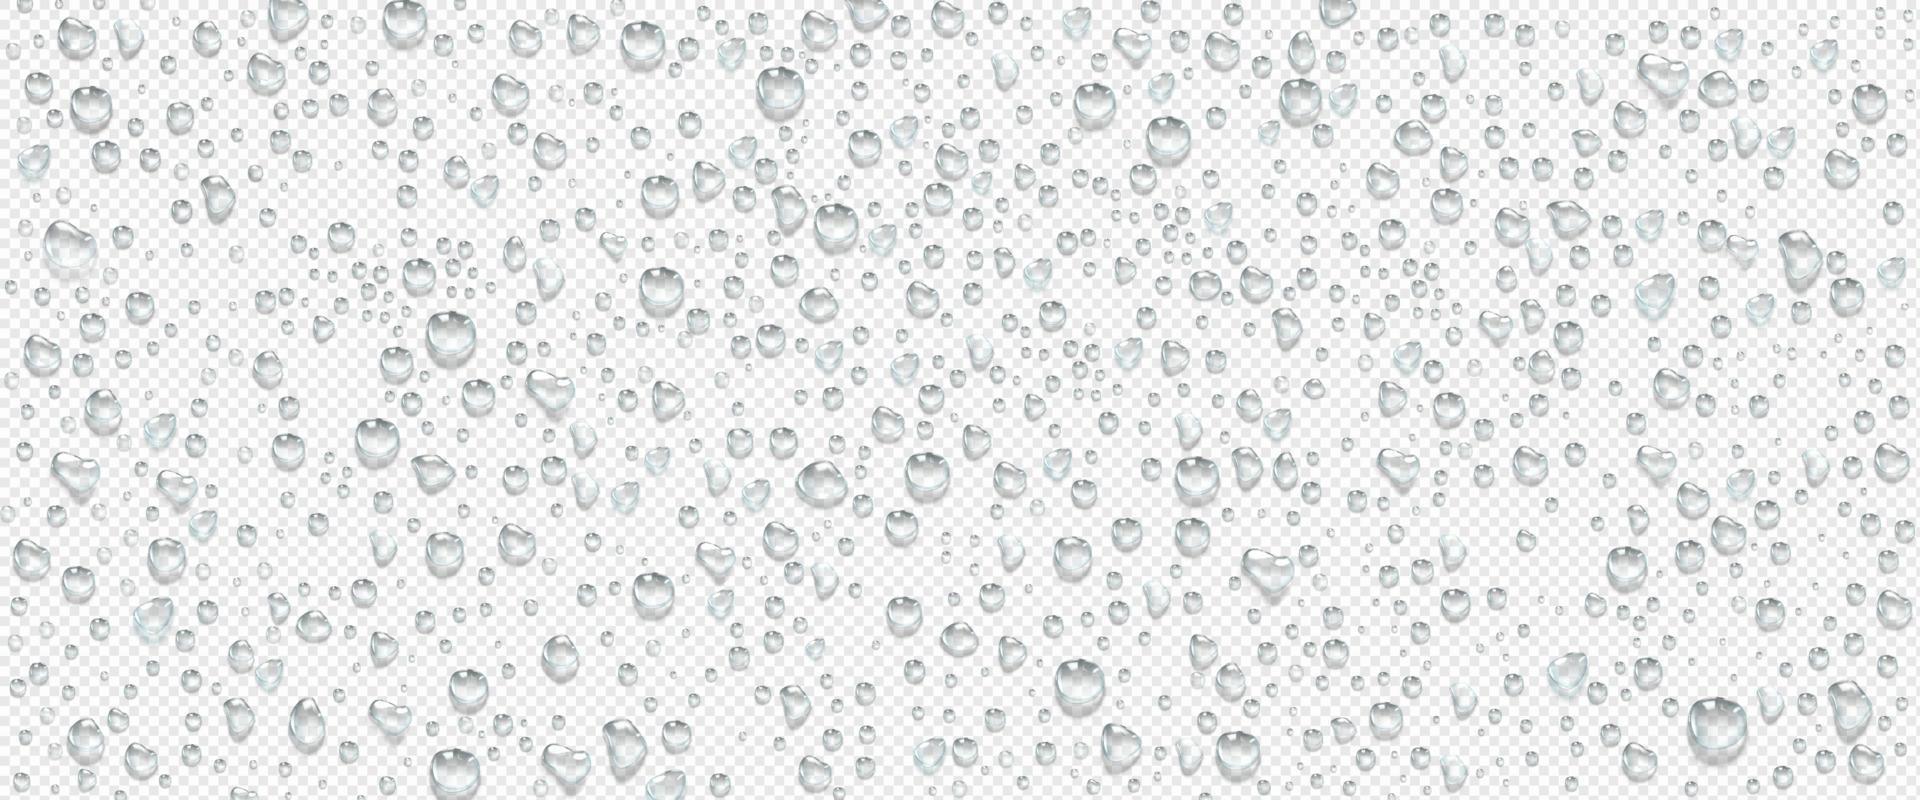 Condensation water drops on transparent background vector